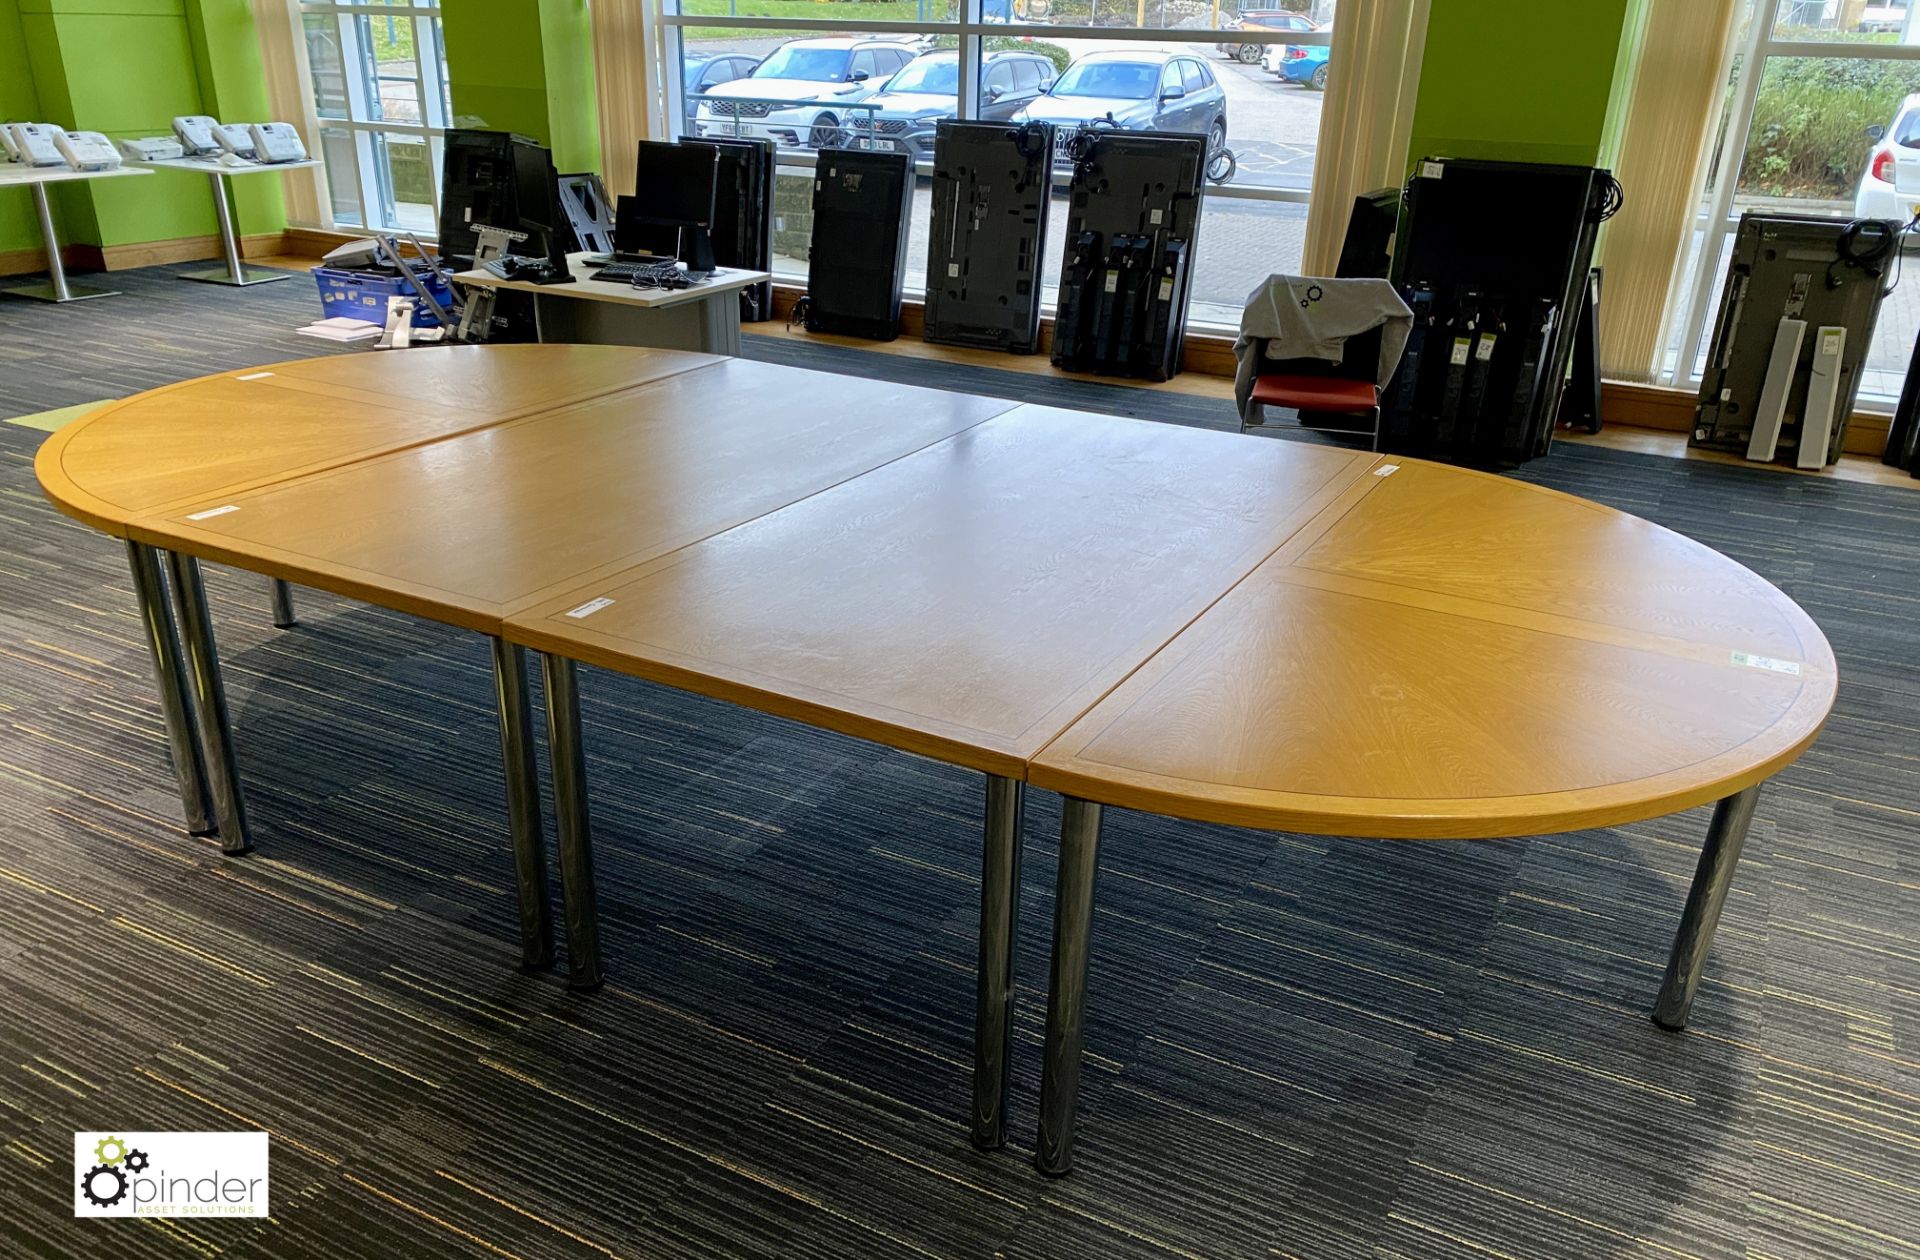 Light oak inlaid 4-section Boardroom Table, total overall dimension 4000mm x 2000mm - Image 3 of 8